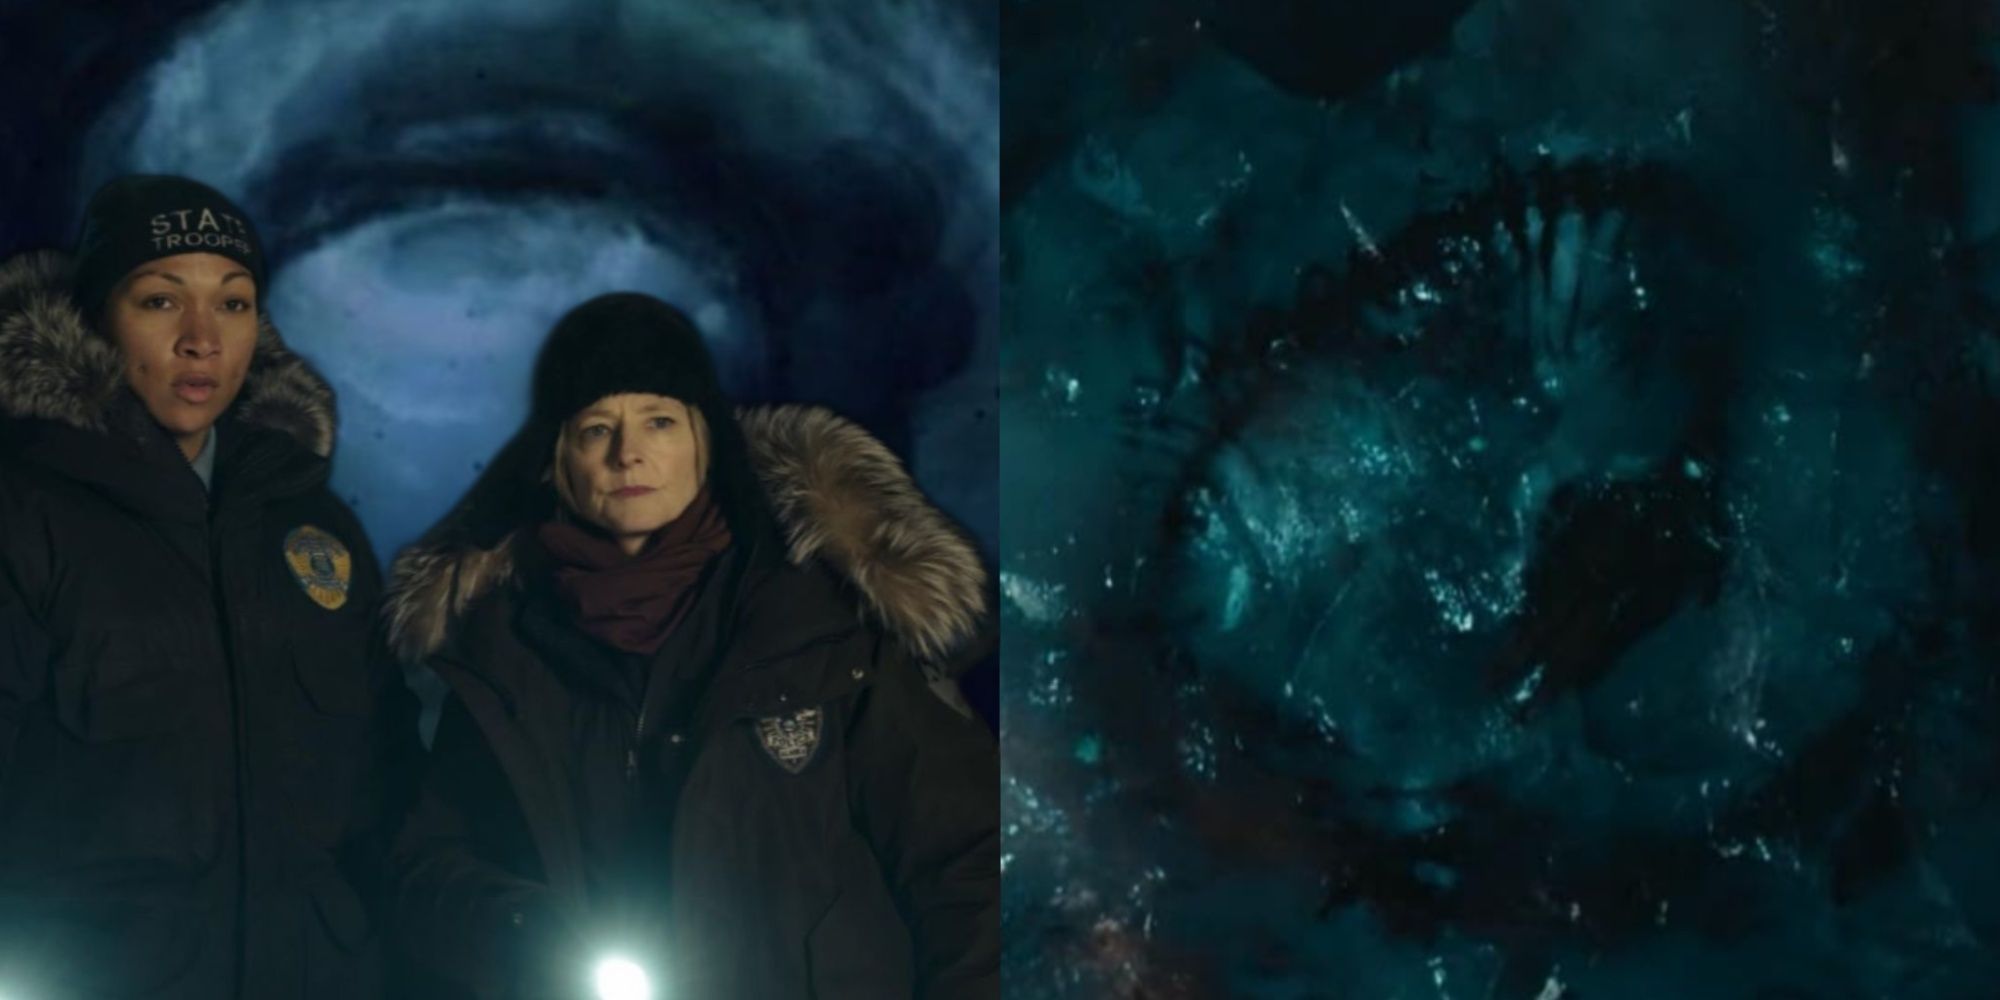 Split image of Kalie Reis' and Jodie Foster's characters Navarro and Danvers in front of the cosmic spiral portal from Season 1's finale and the spiral fossil remains in Season 4's ice cave.